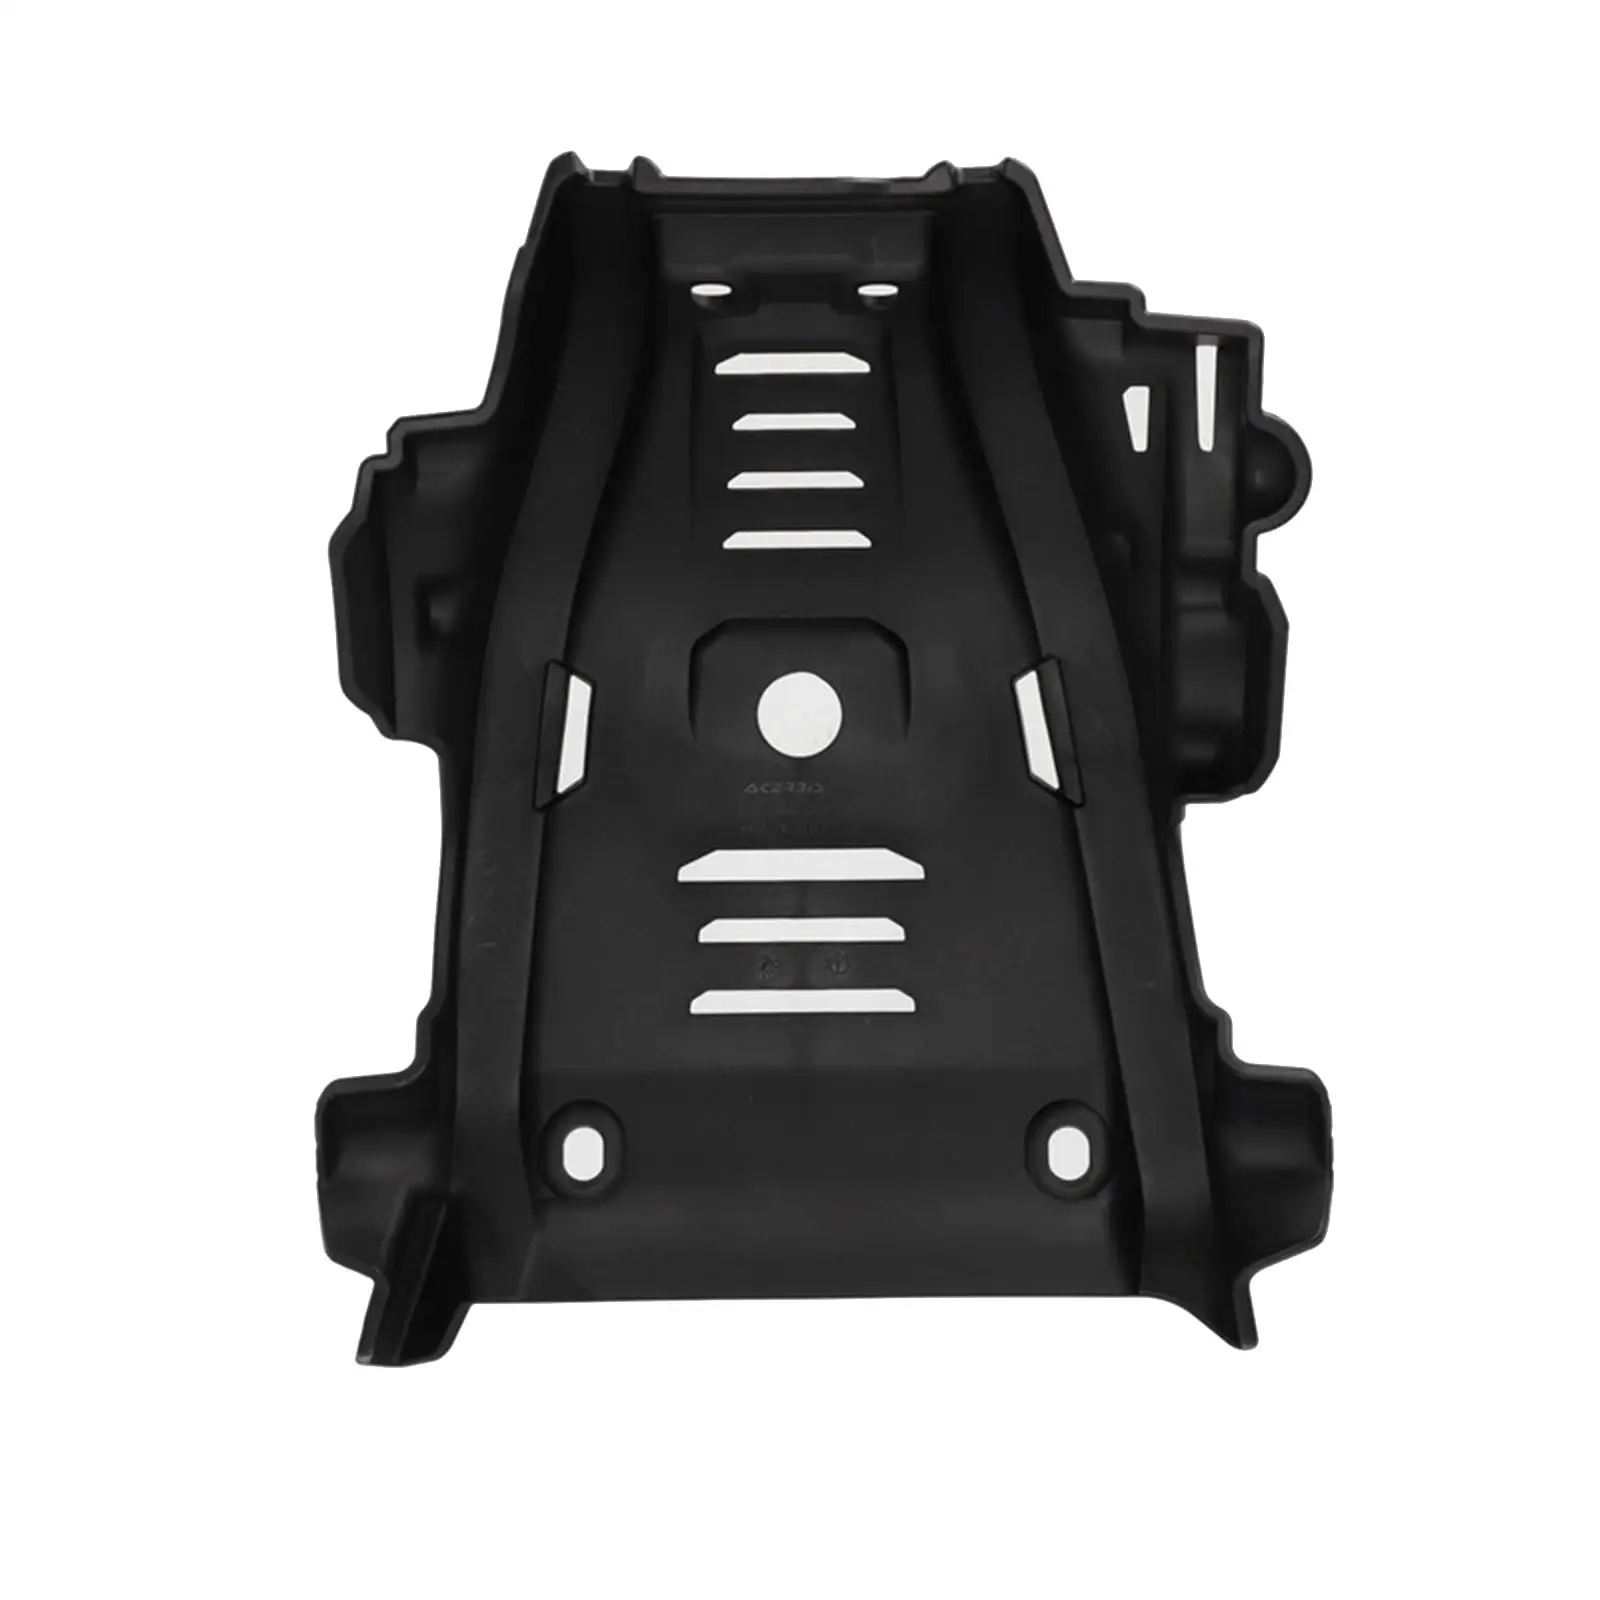 Engine Base Chassis Guard Plate for Crf300L Motorcycle High Performance